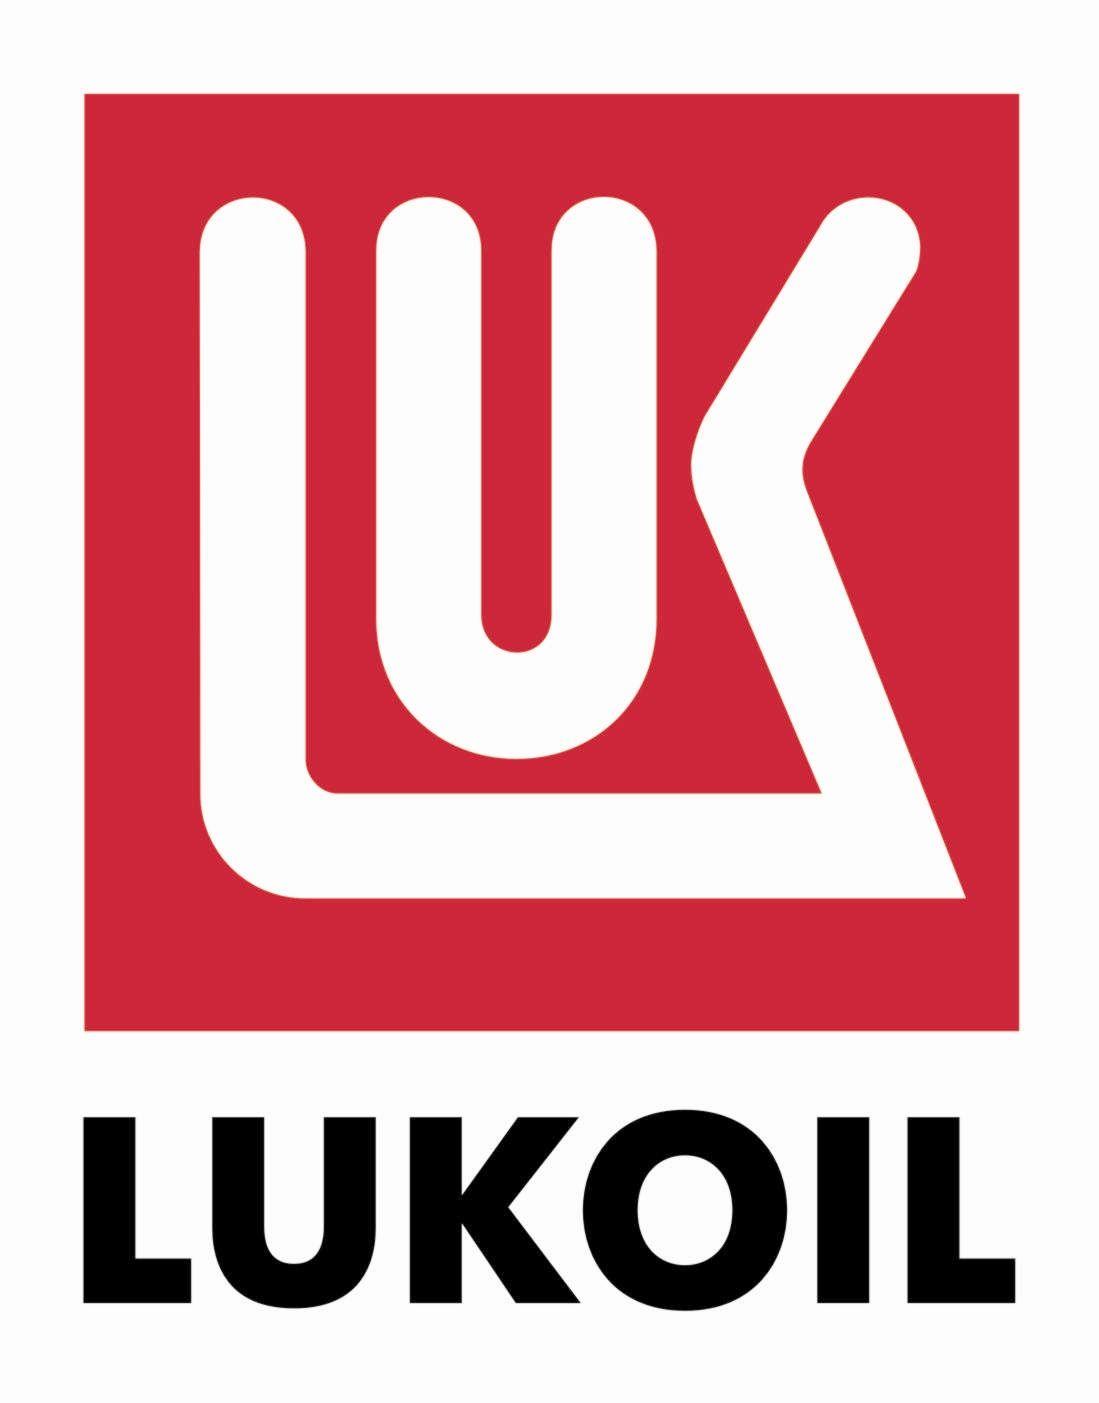 Red Oil Company Logo - Lukoil | GAS AND OIL IN LIVING COLOR #1 | Oil company logos, Energy ...